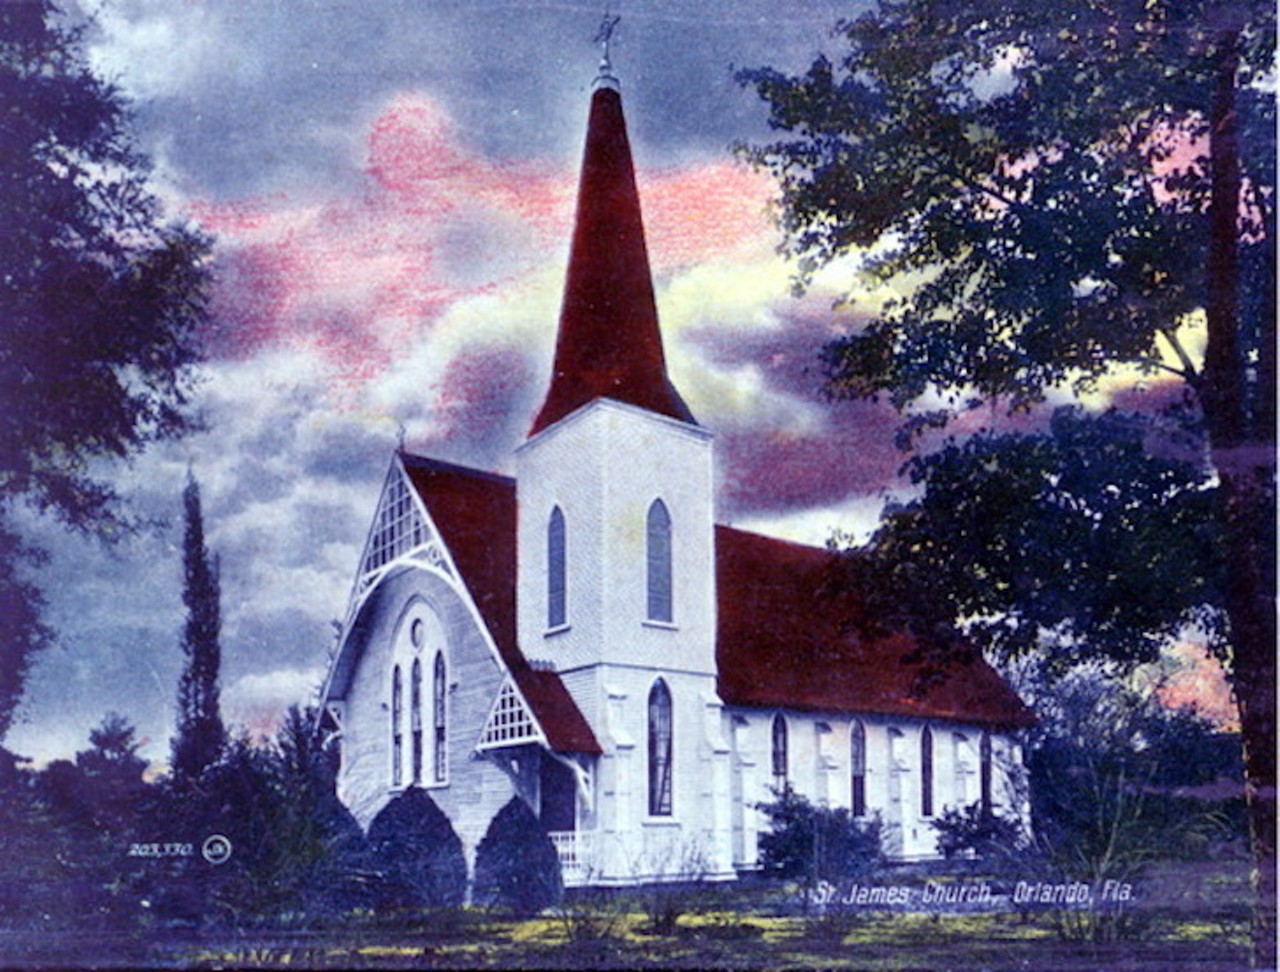 A postcard of St. James Church in Orlando, published sometime in the 1900s.